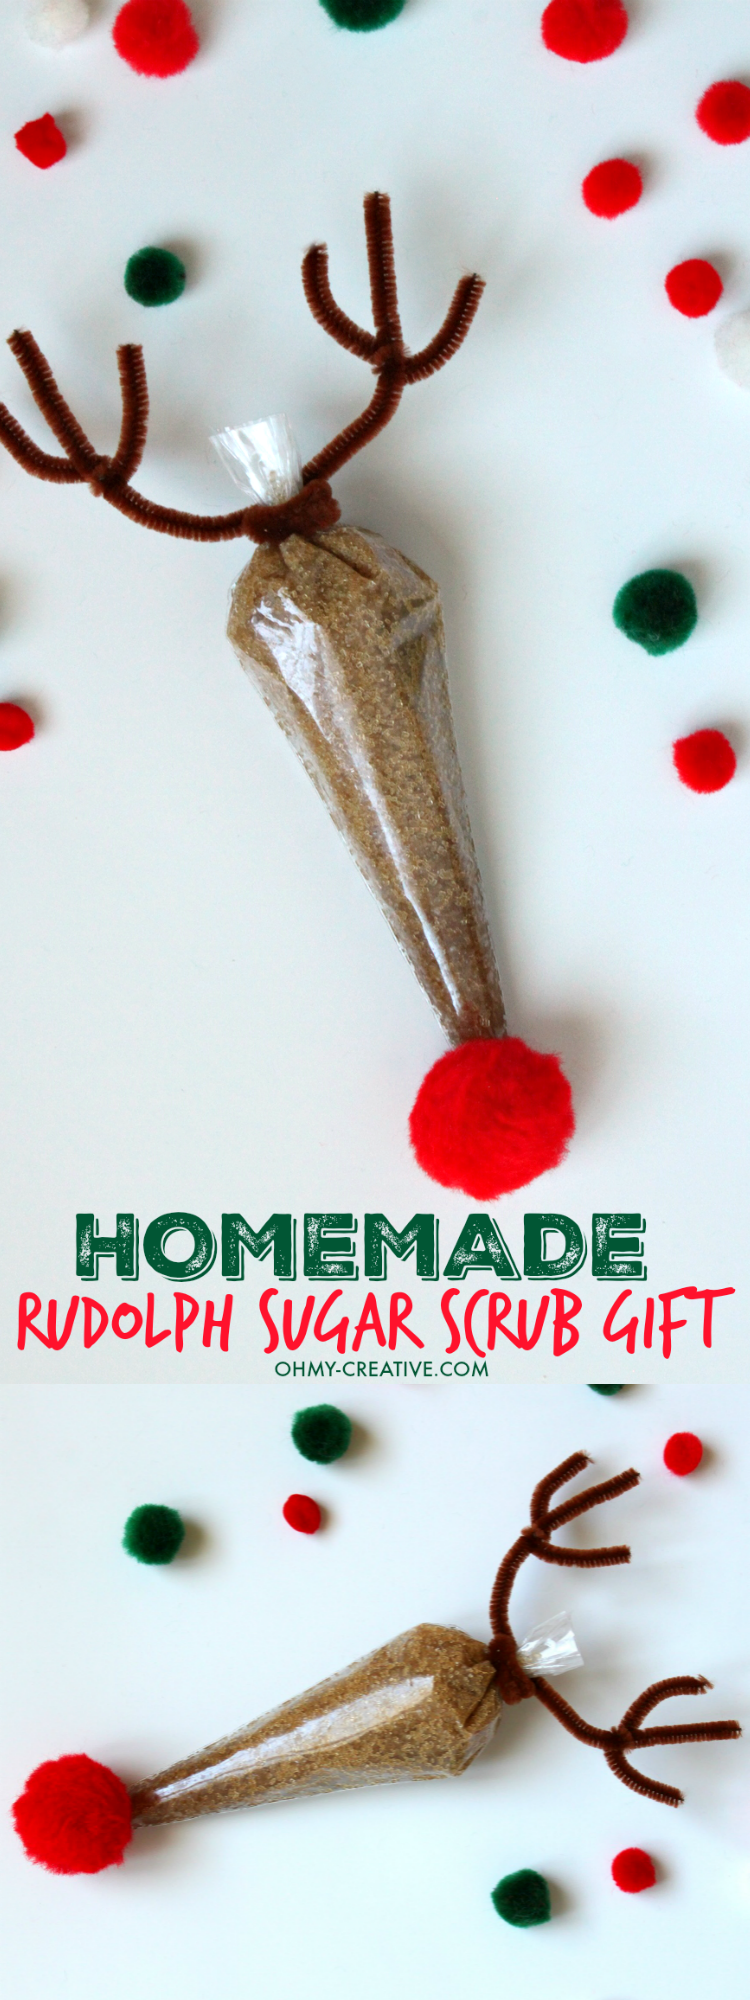 This Homemade Rudolph Sugar Scrub Gift Using Essential Oils is so easy to make and just adorable to give to so many on your Christmas shopping list! Great stocking stuffer too! | OHMY-CREATIVE.COM 